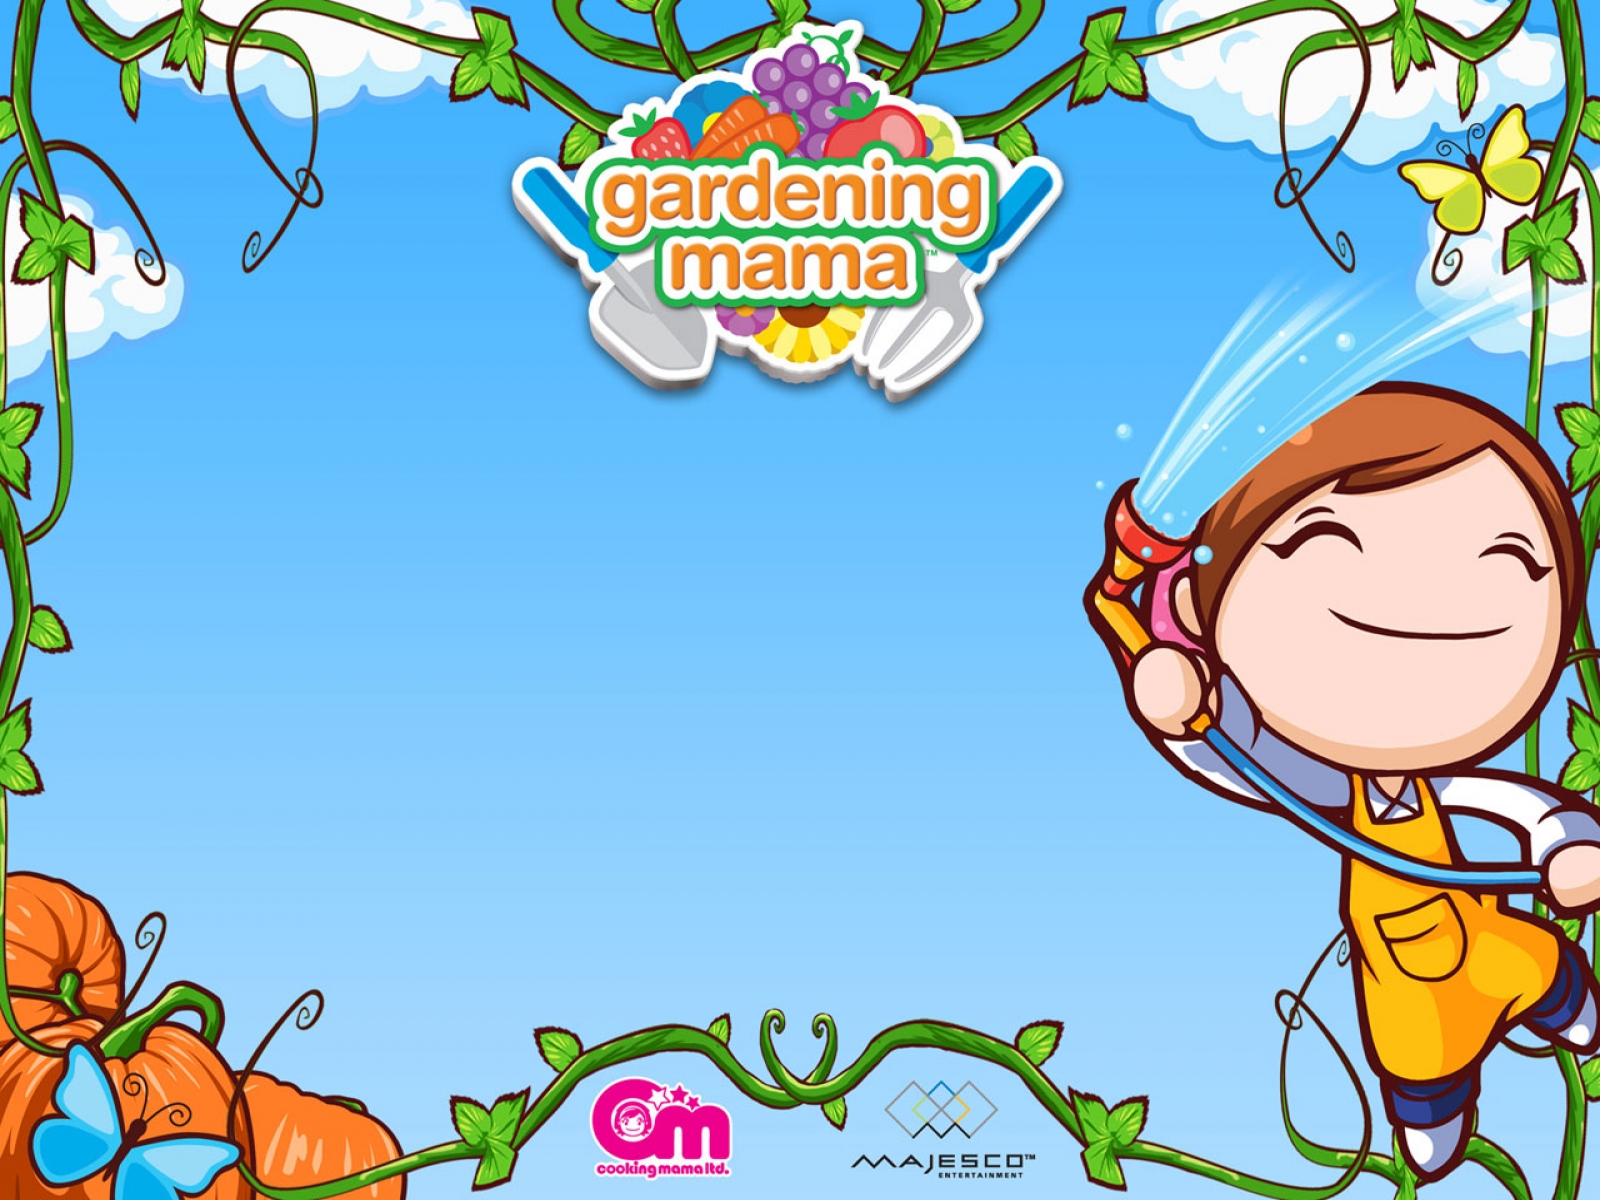 Gardening Mama 2 Forest Friends Will Blossom On 3ds This Spring